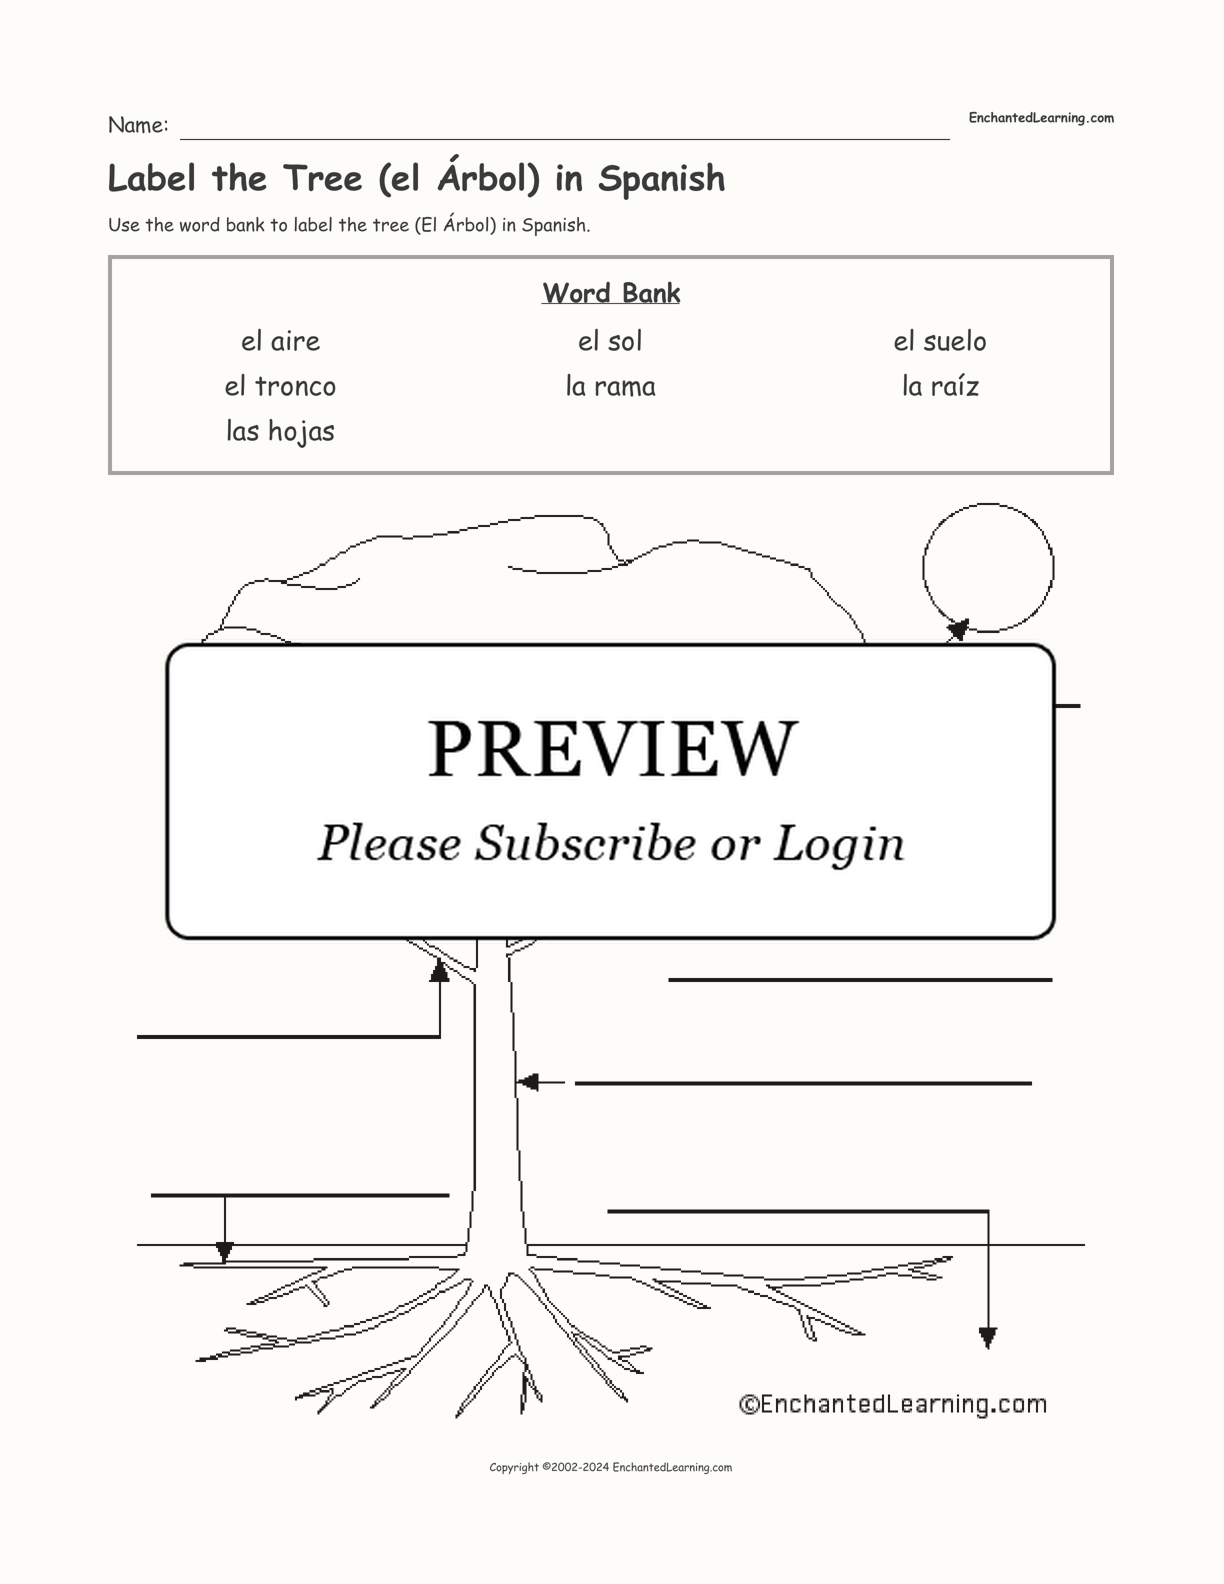 Label the Tree (el Árbol) in Spanish interactive worksheet page 1